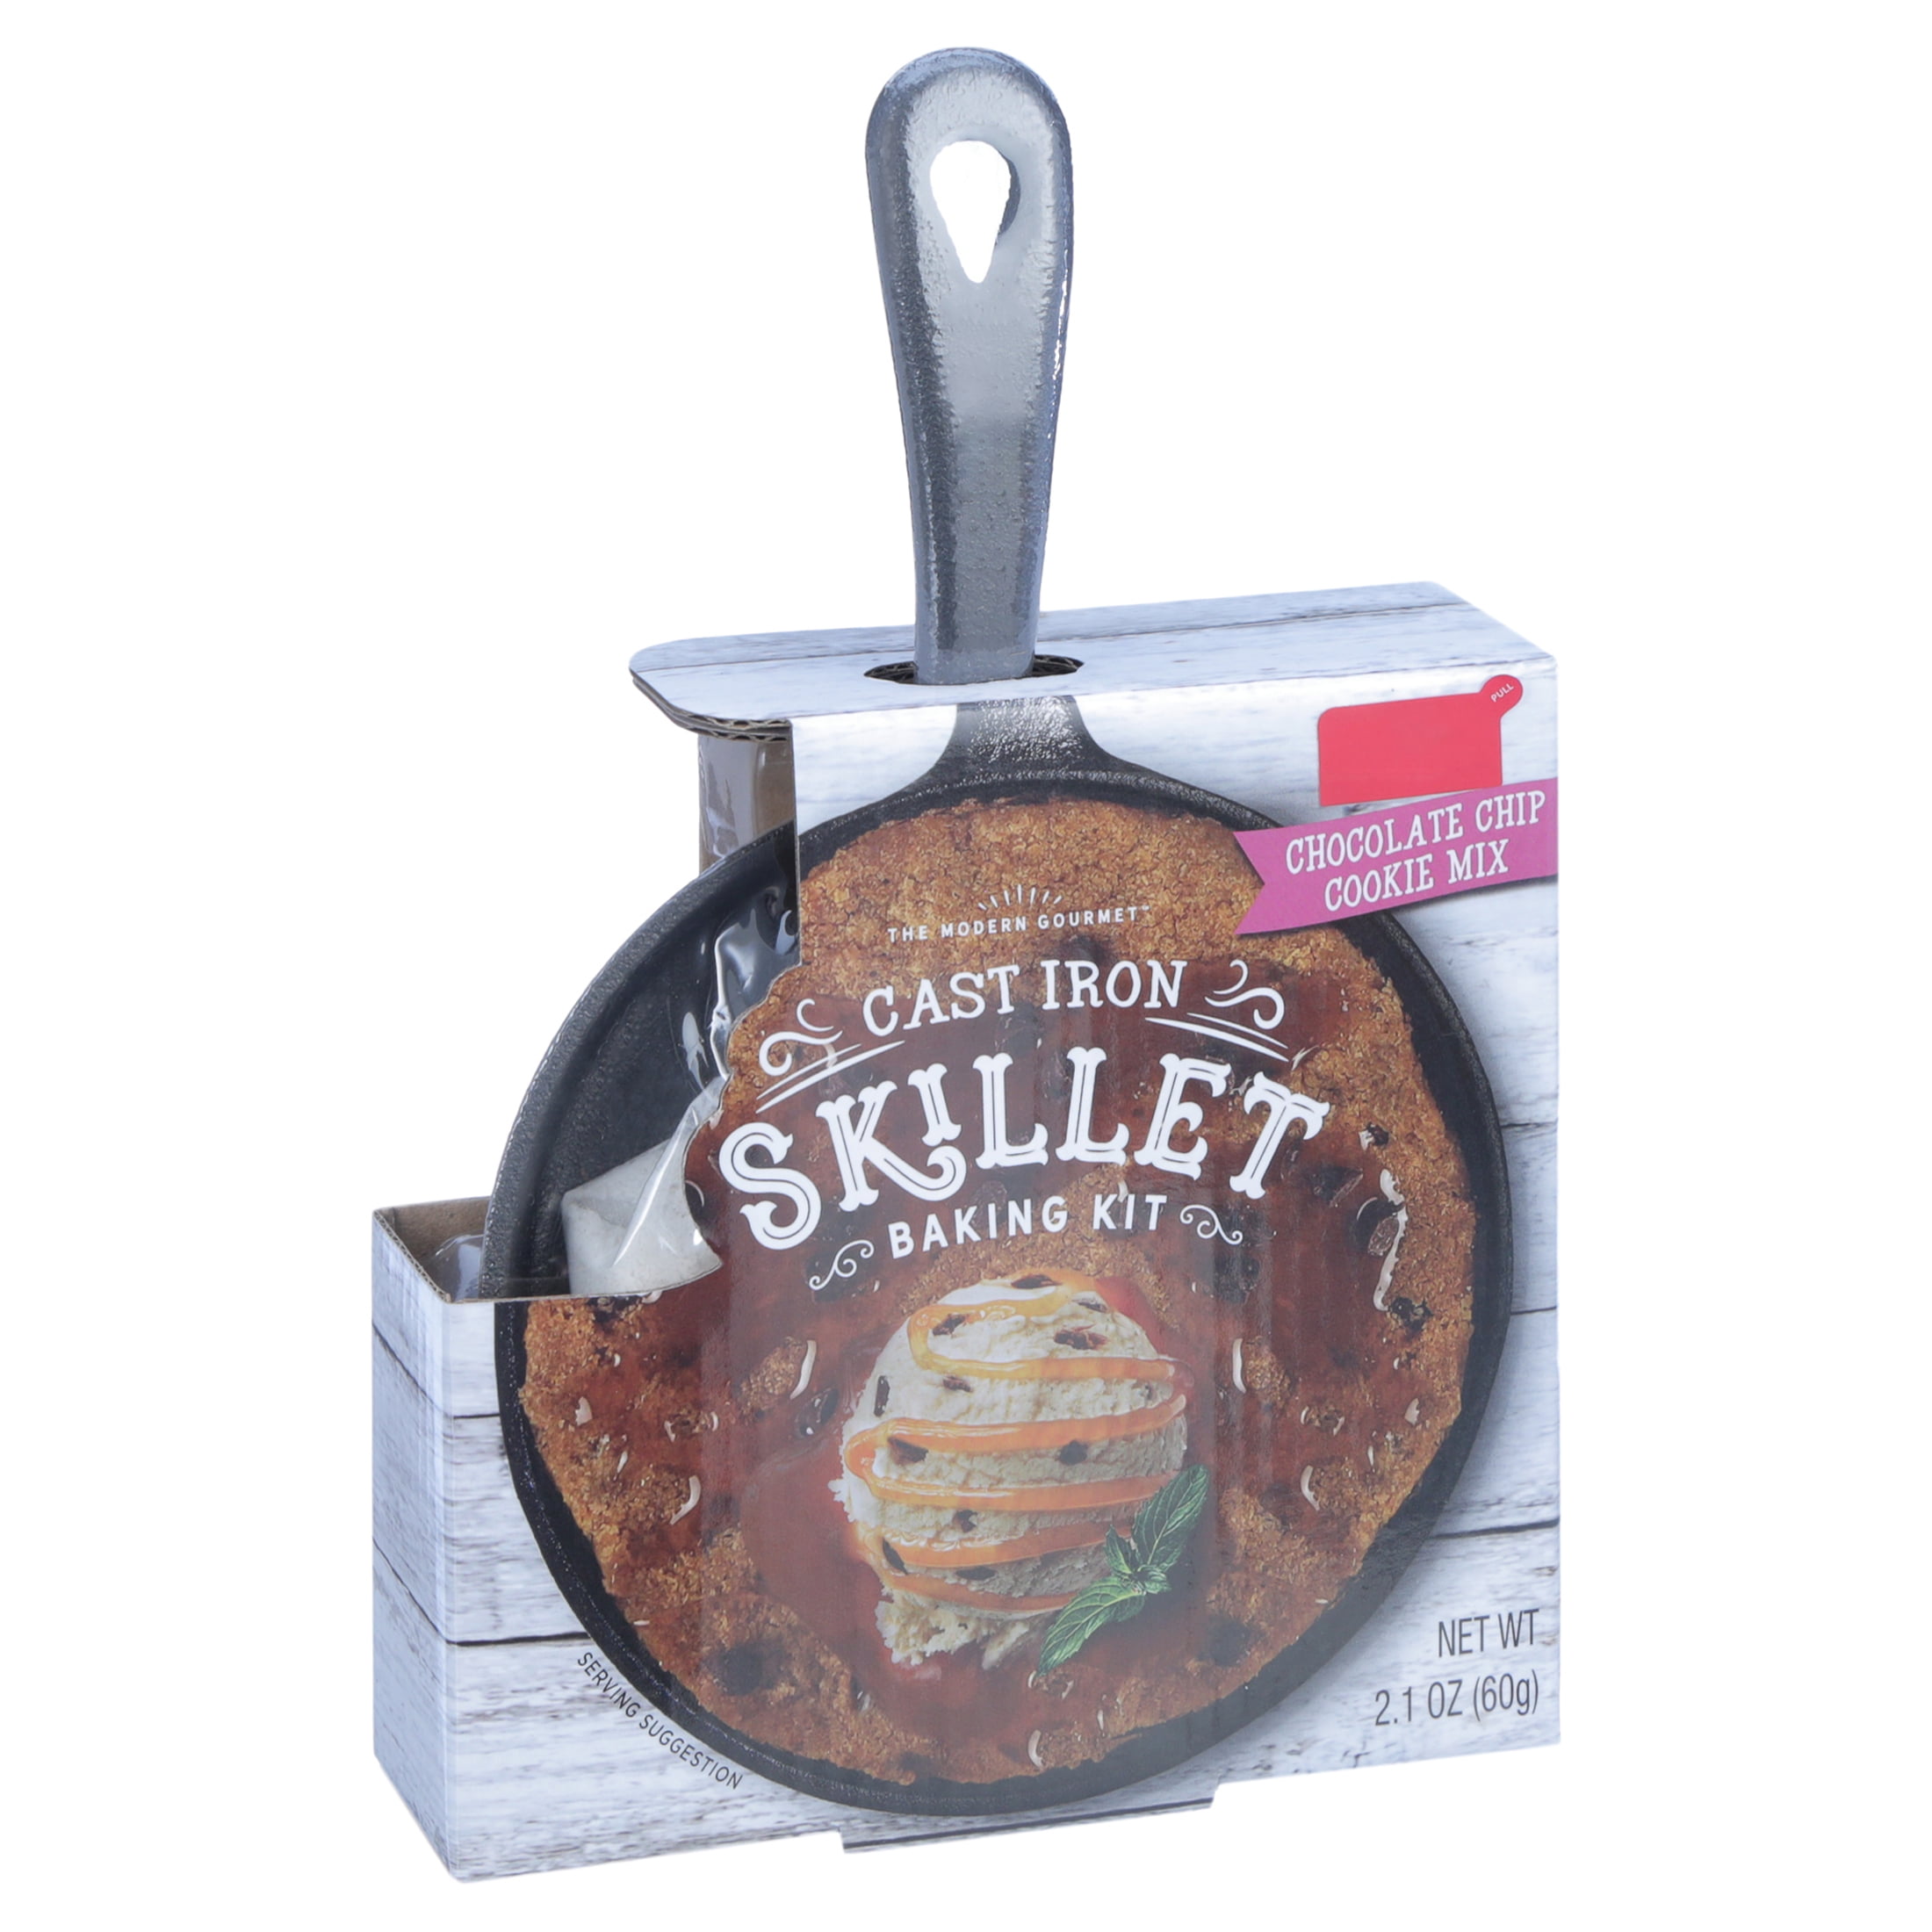 JUST REDUCED! New Cast Iron Skillet Baking Kit - household items